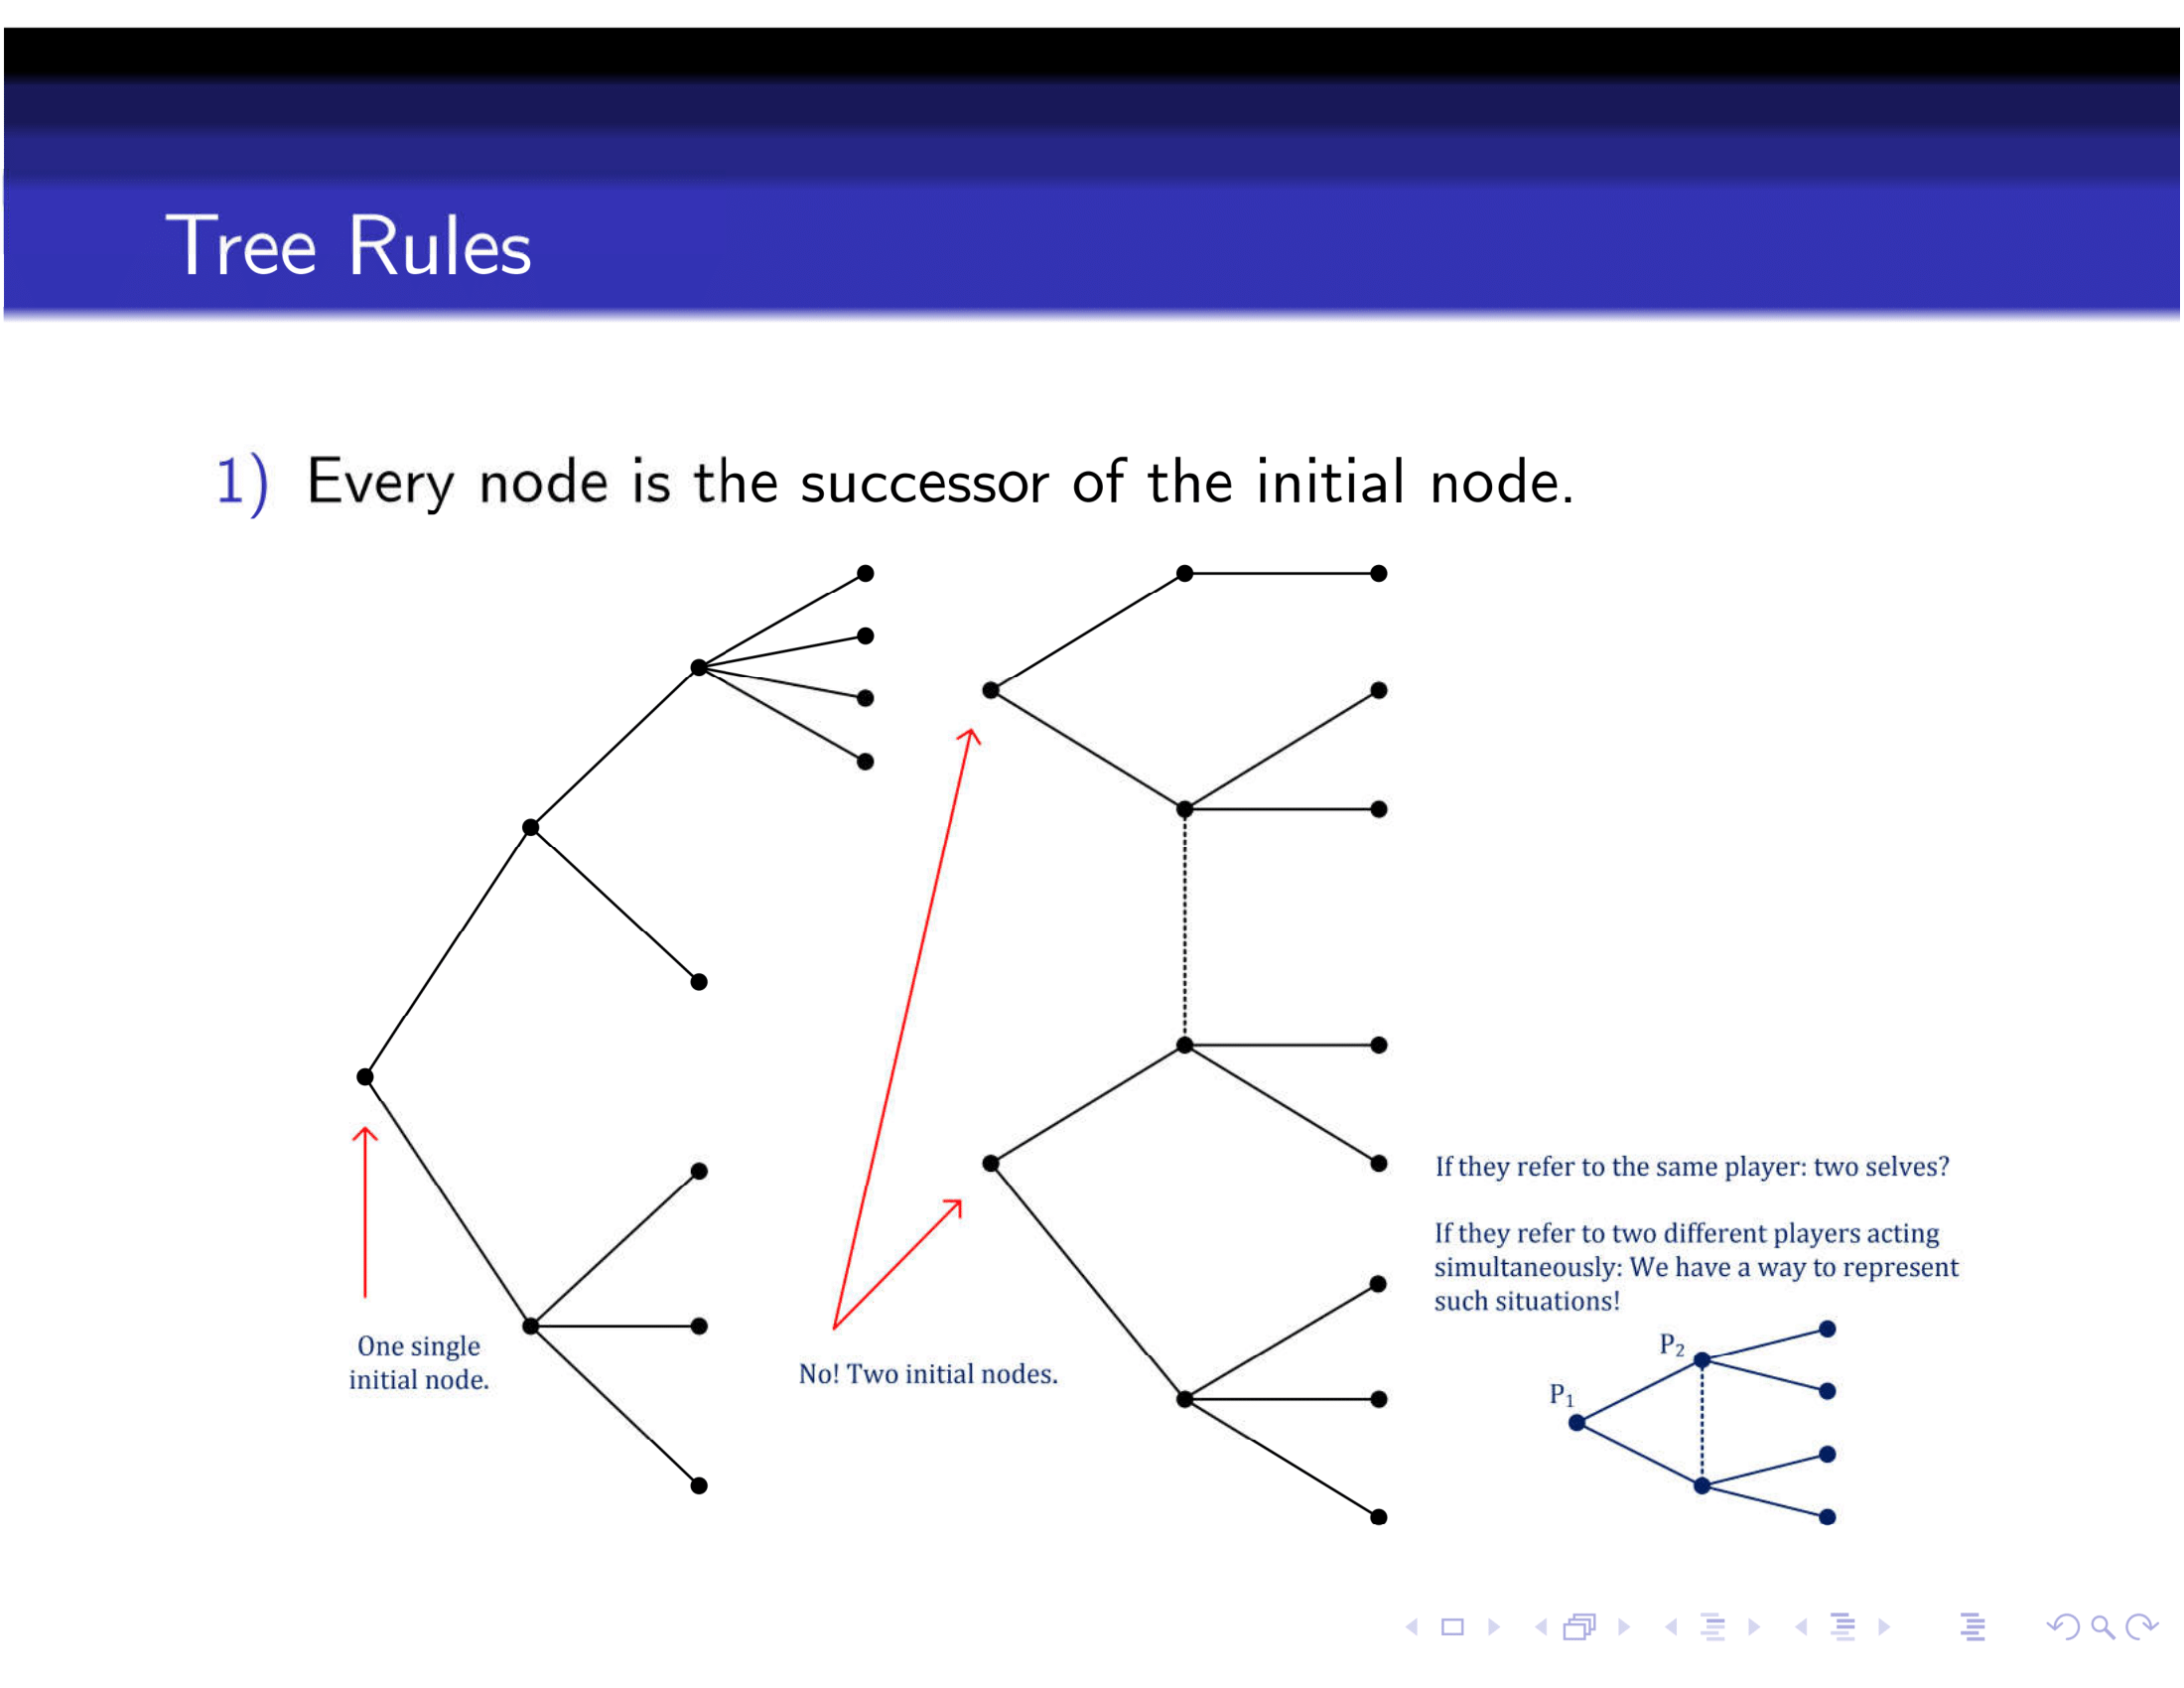 Rules of a Game Tree